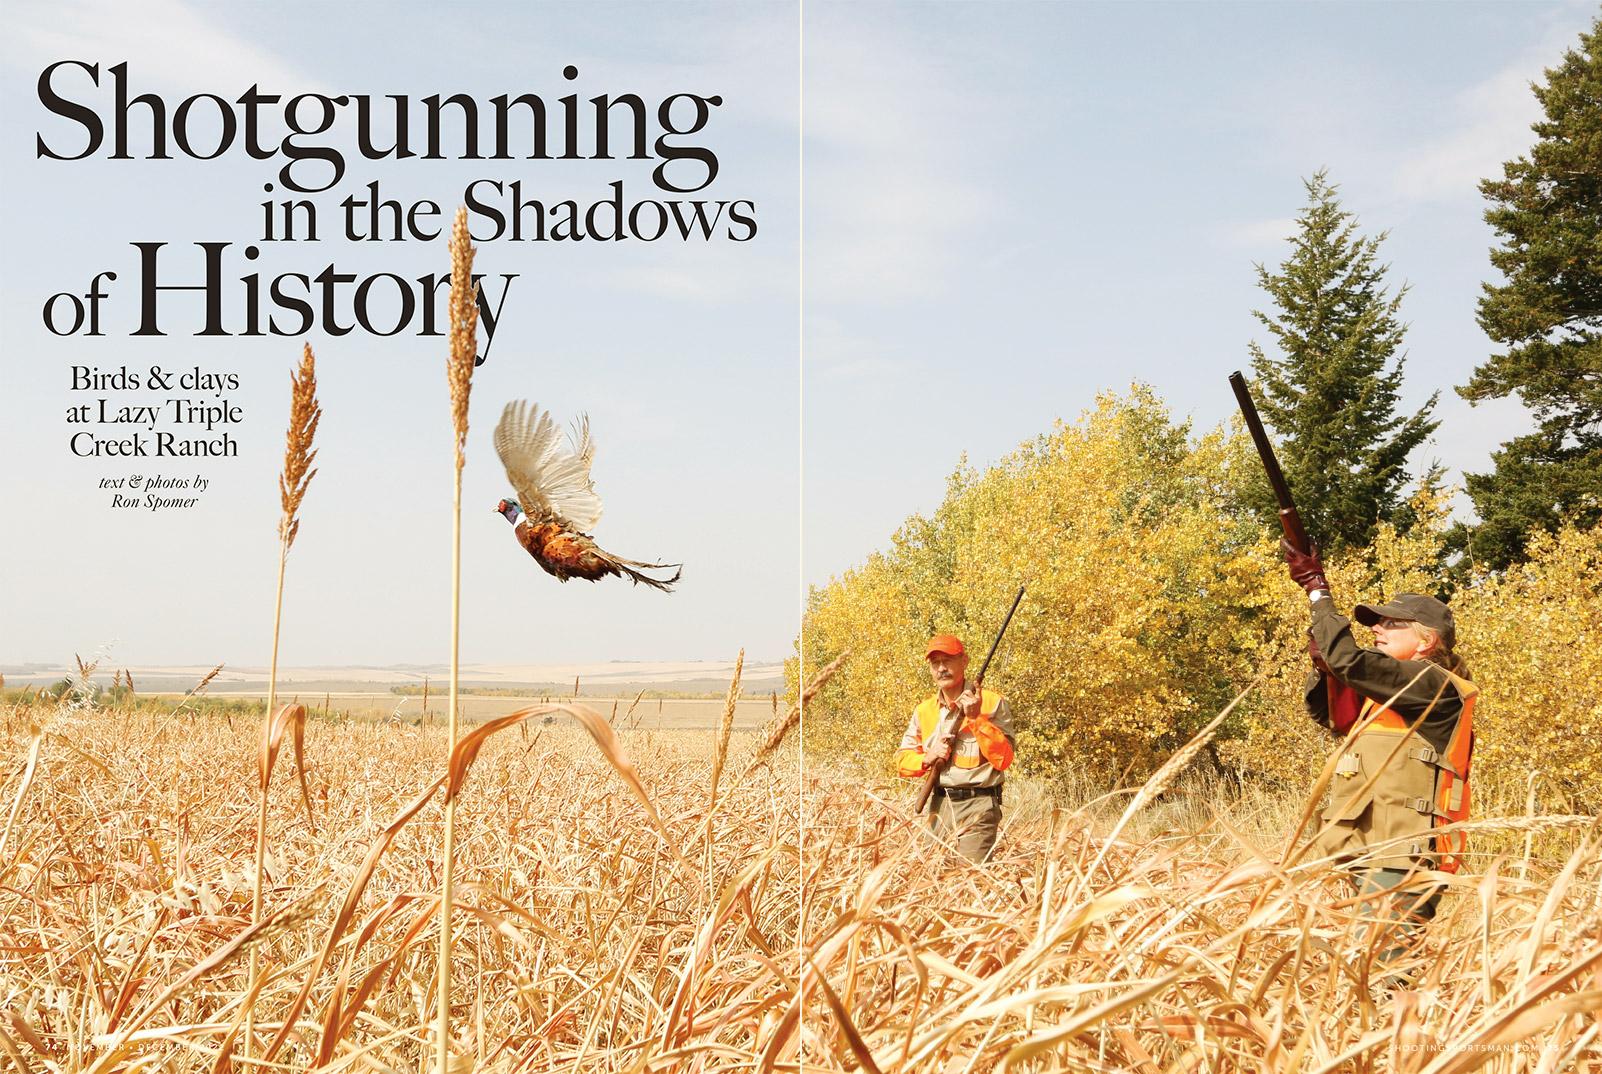 Shooting Sportsman Magazine Article on Driven Pheasant Hunting at Lazy Triple Creek Ranch